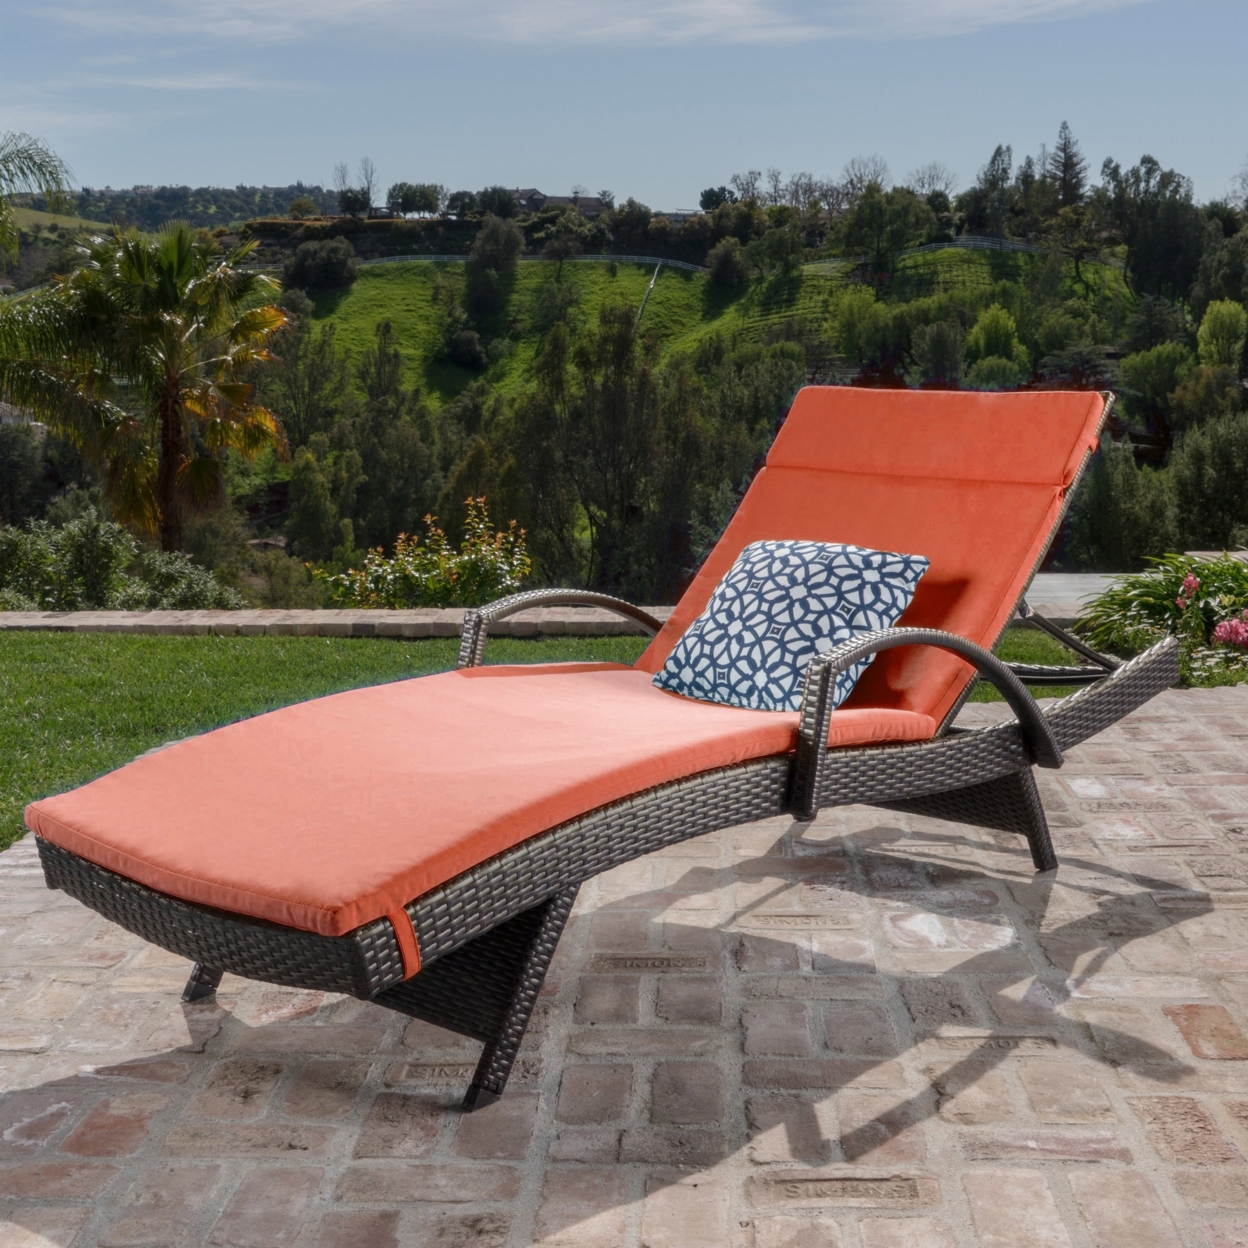 Savana Outdoor Wicker Lounge With Arms With Water Resistant Cushion - Brown/orange, Single